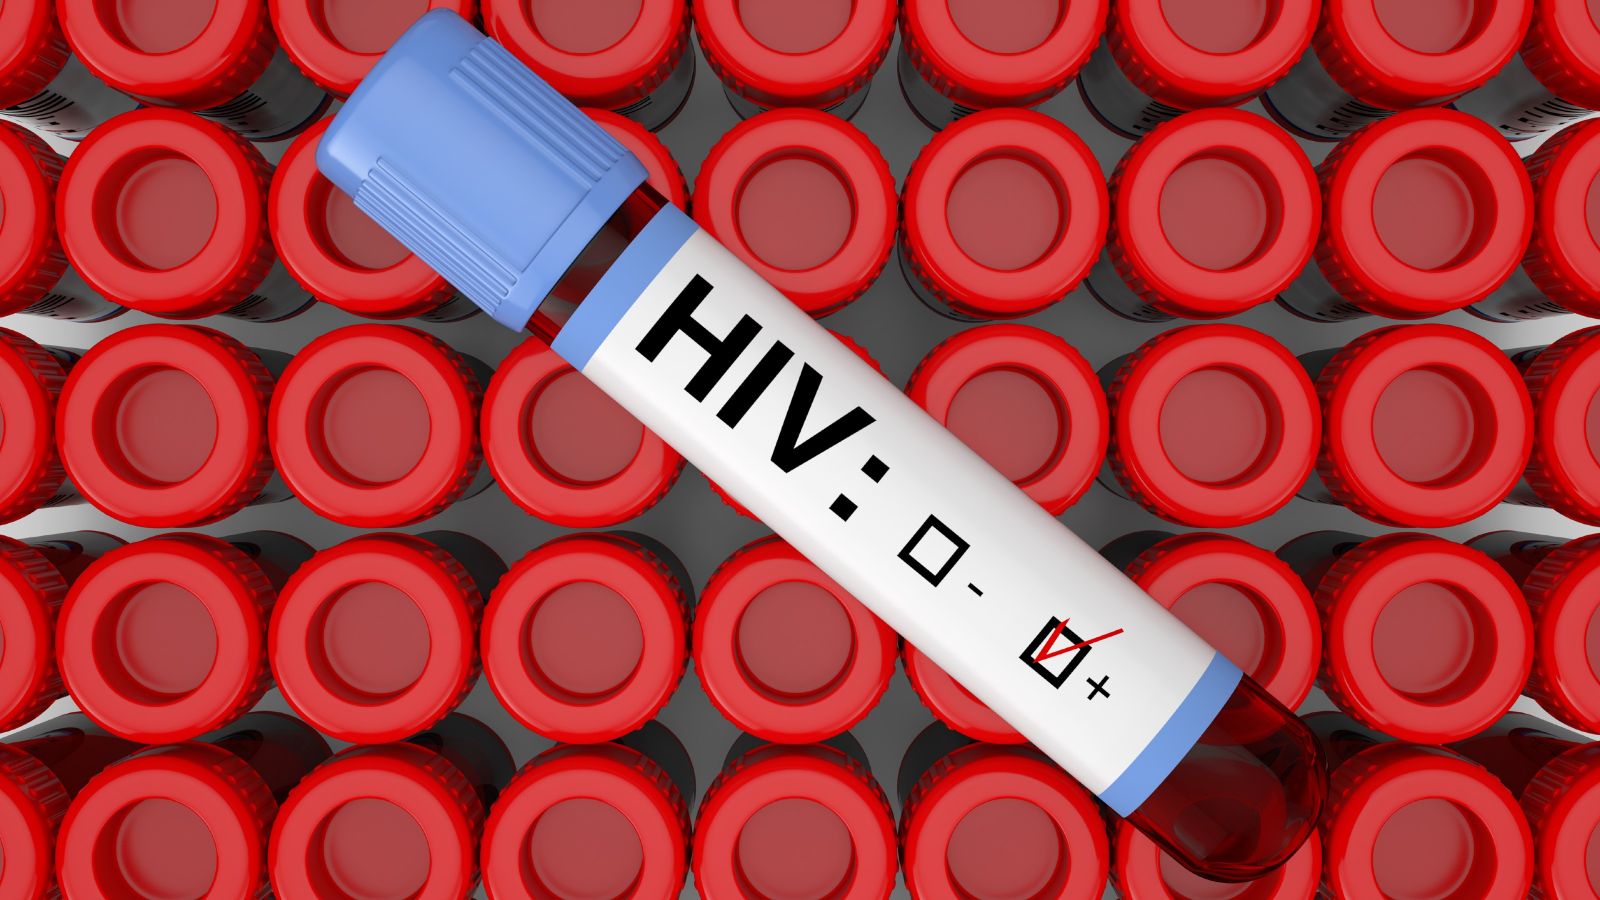 A vial of blood ticked as having tested positive for HIV